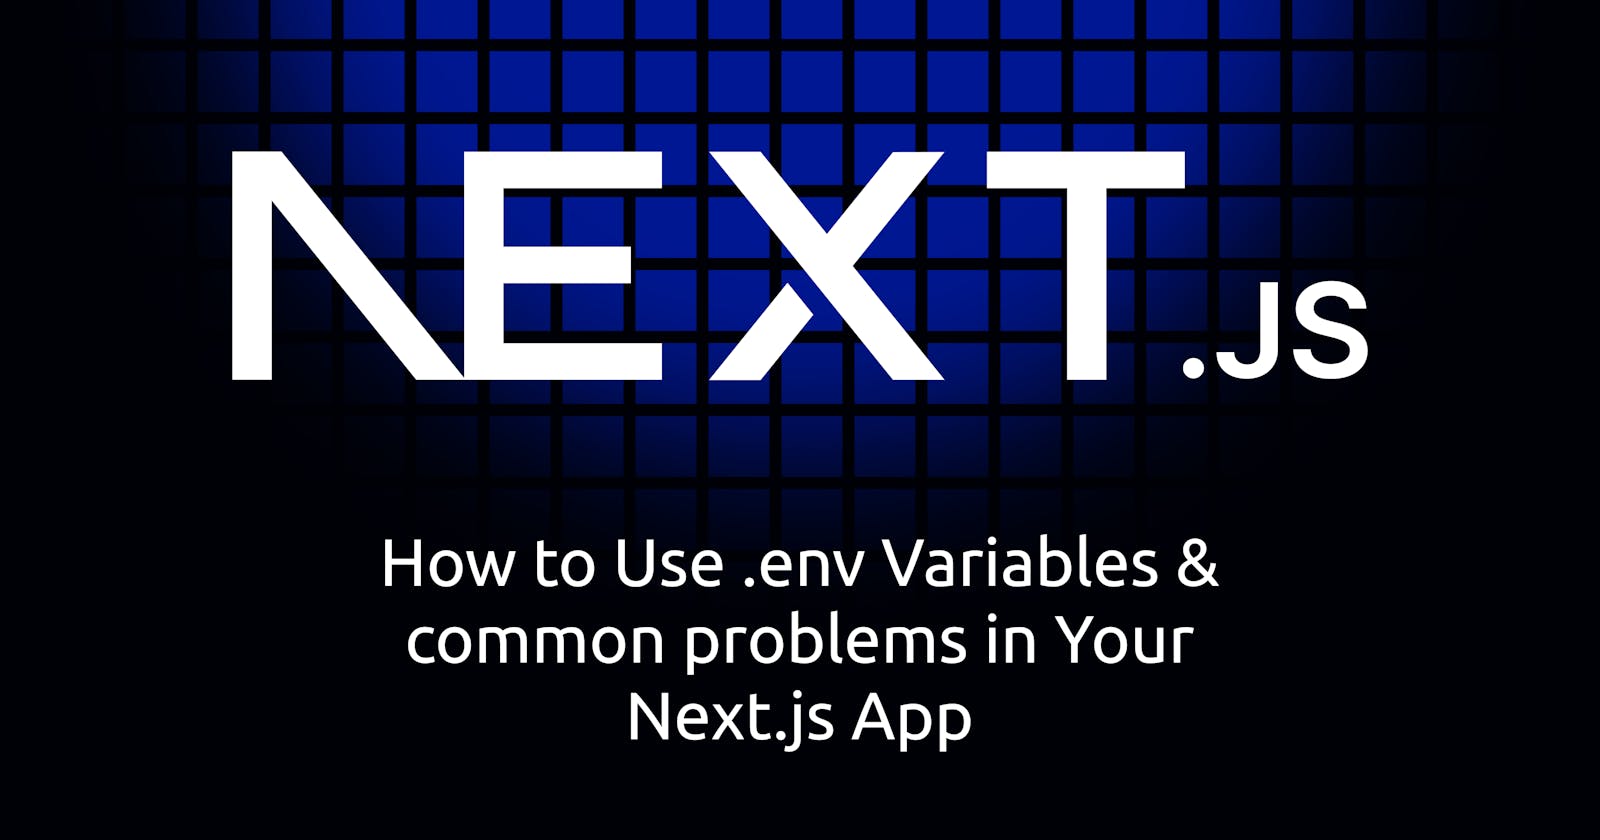 How to Use .env Variables & common problems in Your Next.js App